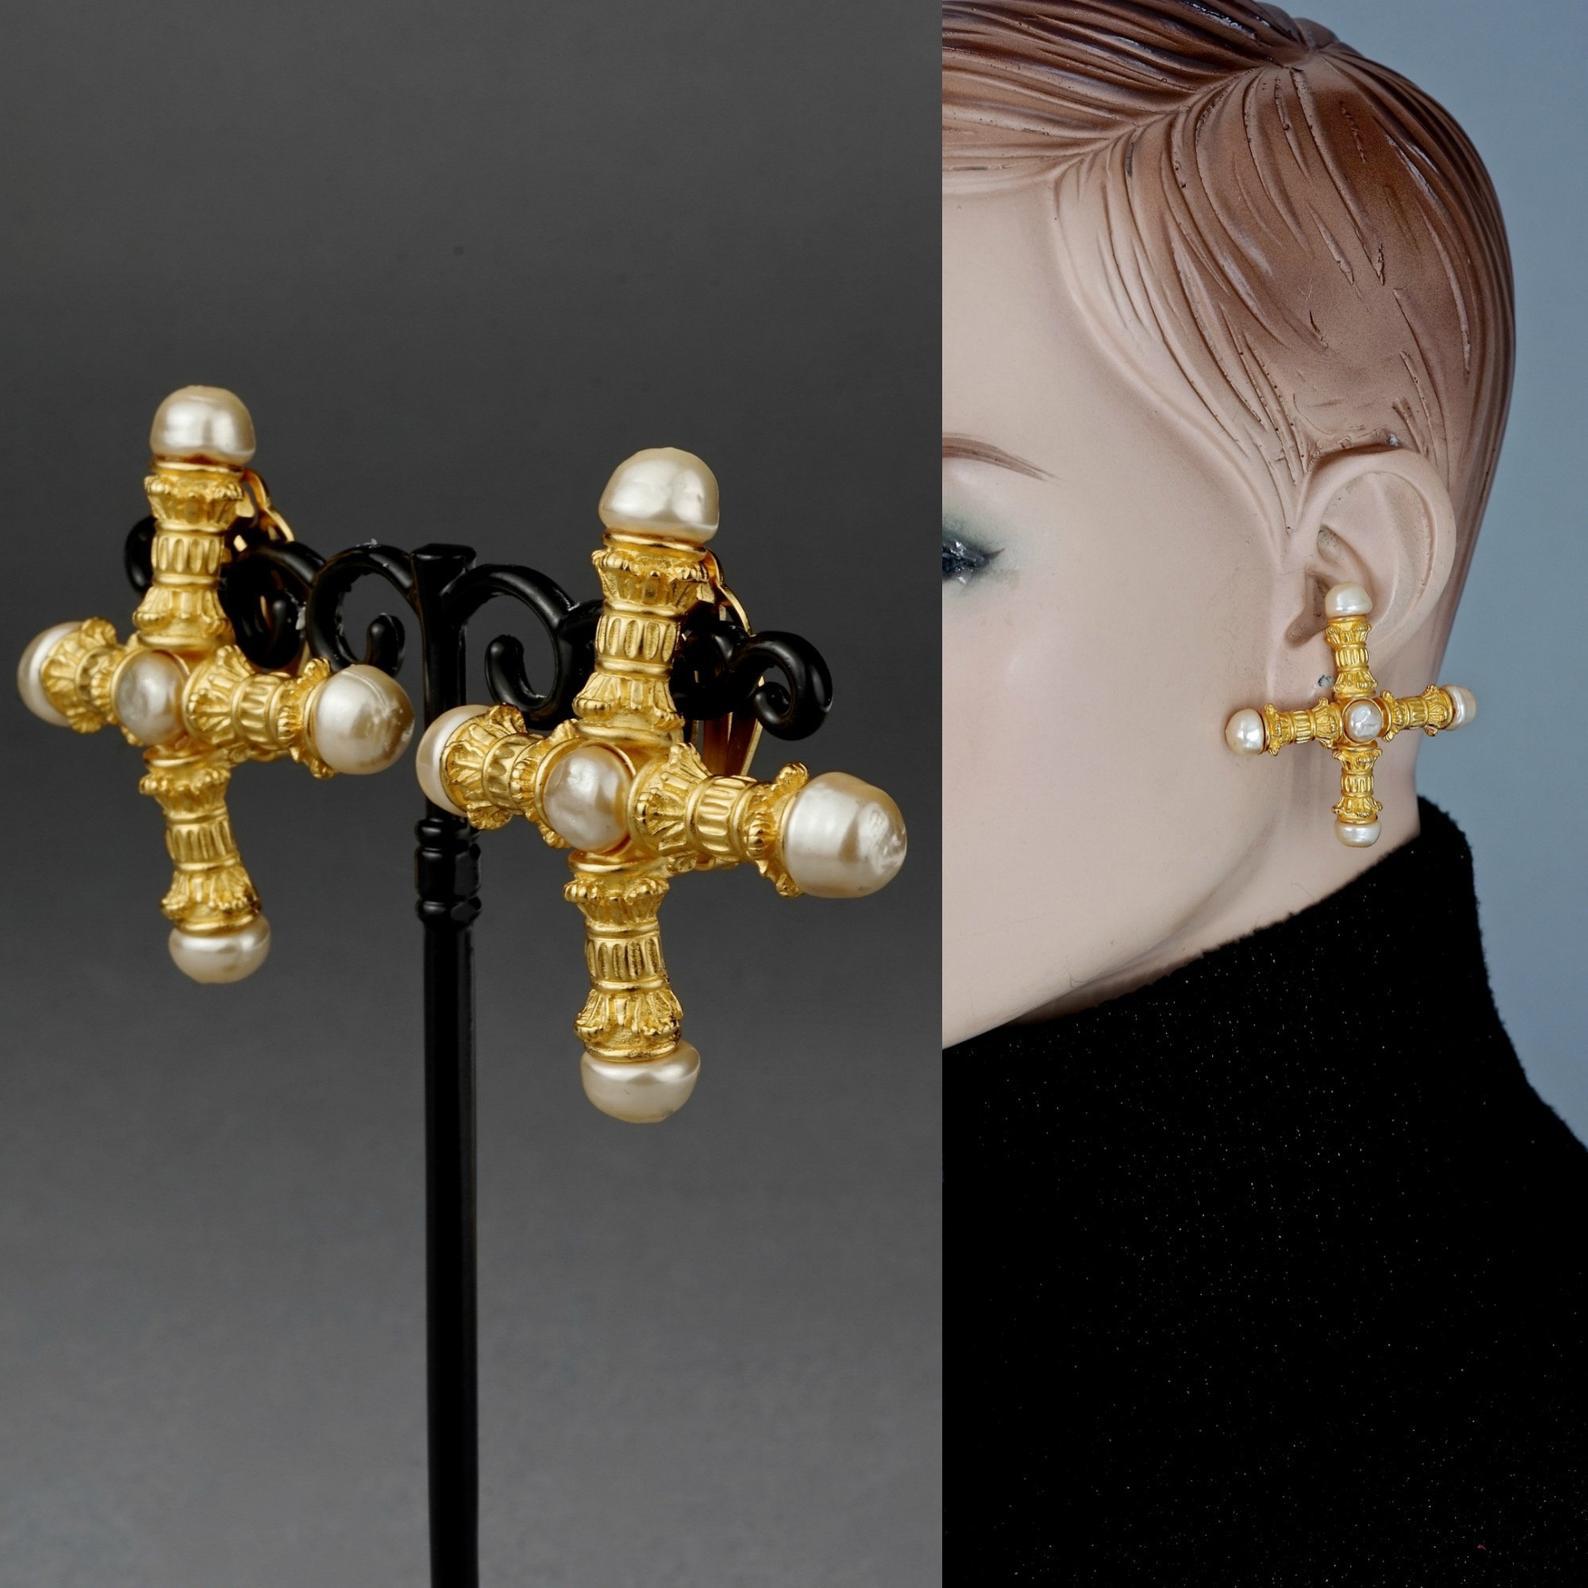 Vintage KARL LAGERFELD Roman Pillar Cross Pearl Earrings

Measurements:
Height: 2 inches (5 cm)
Width: 2 inches (5 cm)
Weight: 19 grams

Features:
- 100% Authentic KARL LAGERFELD.
- Roman pillar motif in the form of cross.
- Embellished with